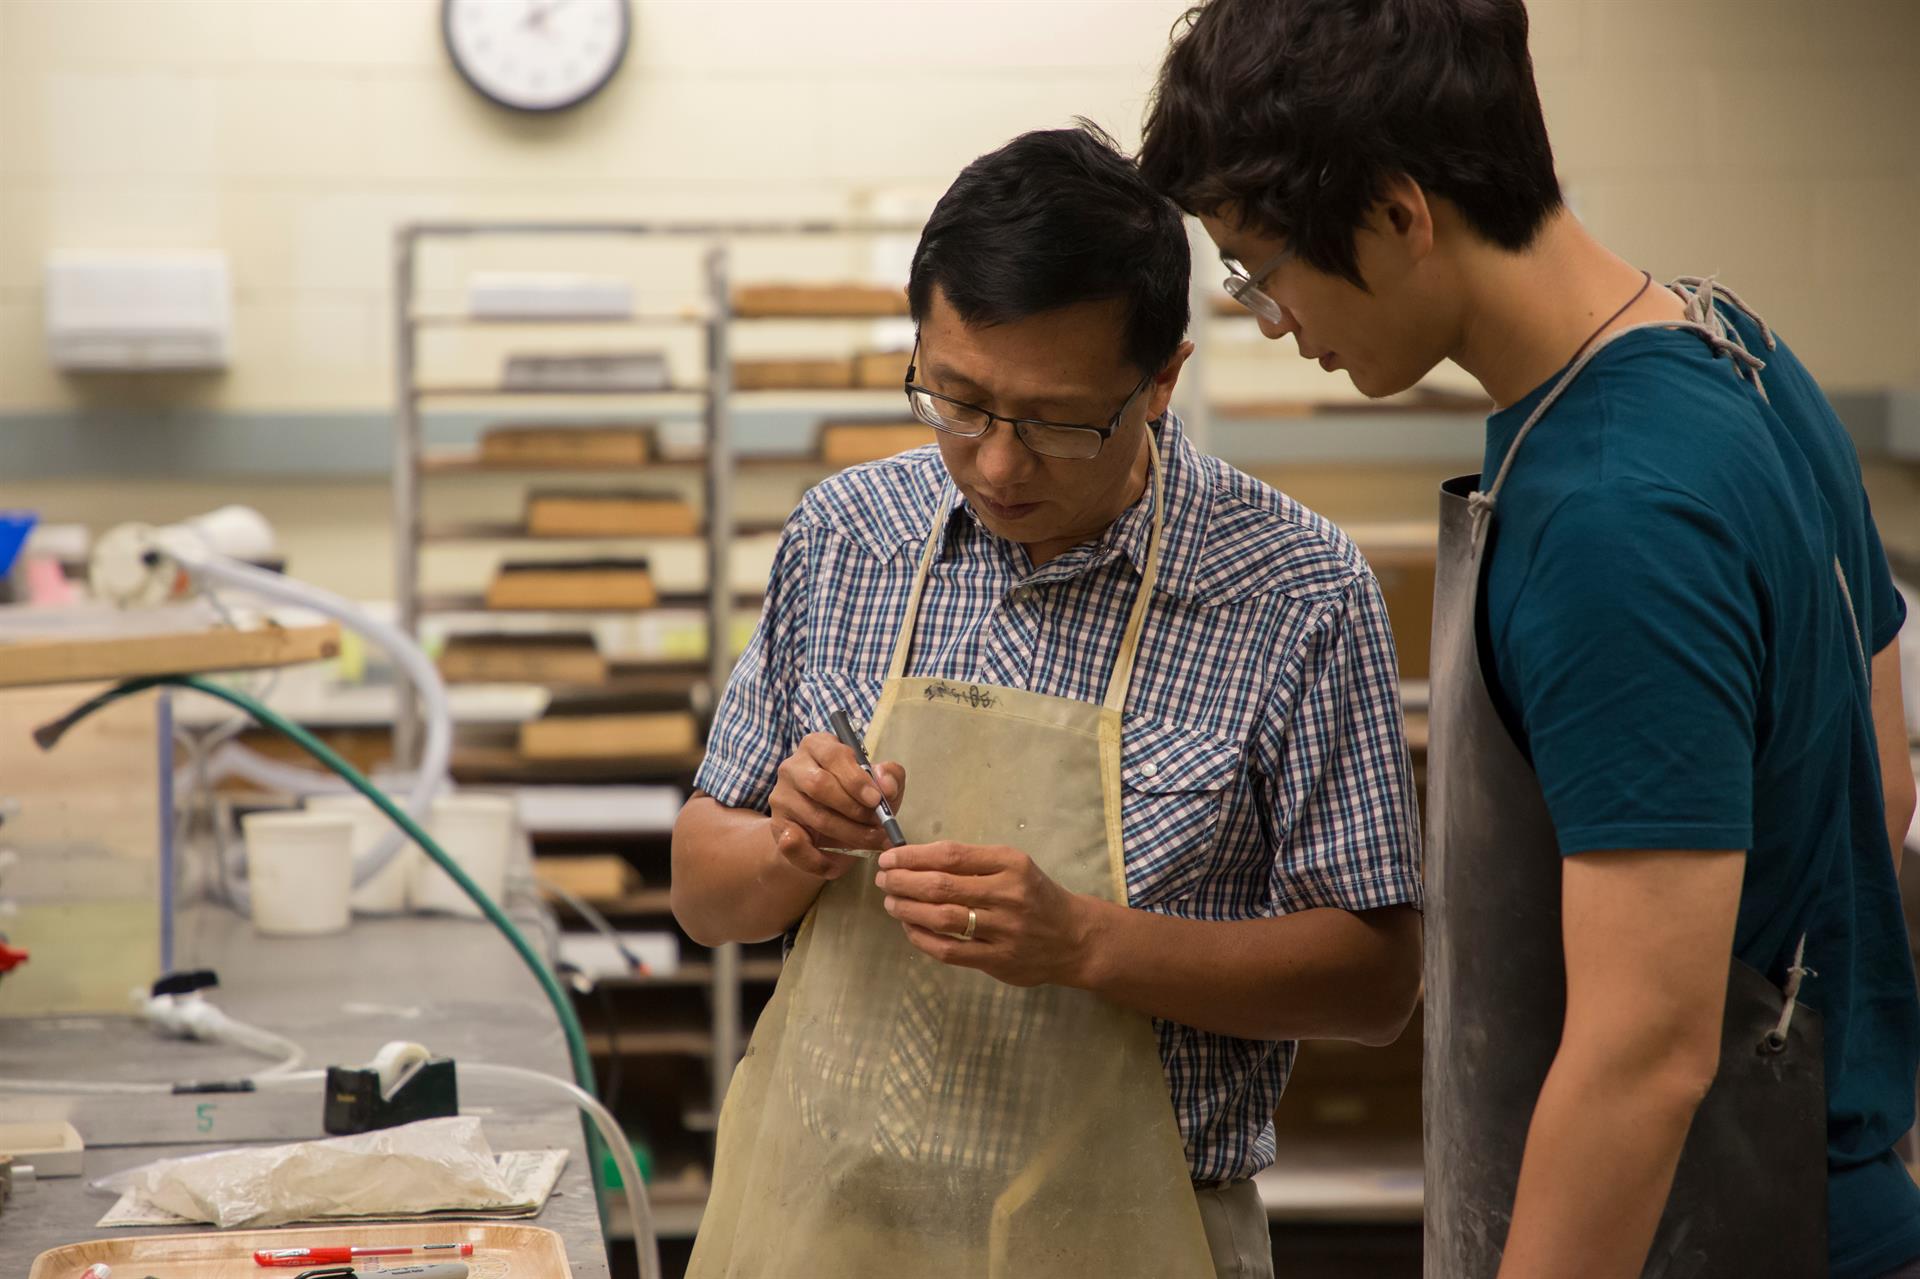 Dr. Wan Yang shows his research student Ziyue Ju how to properly label and cut rock samples for analysis.